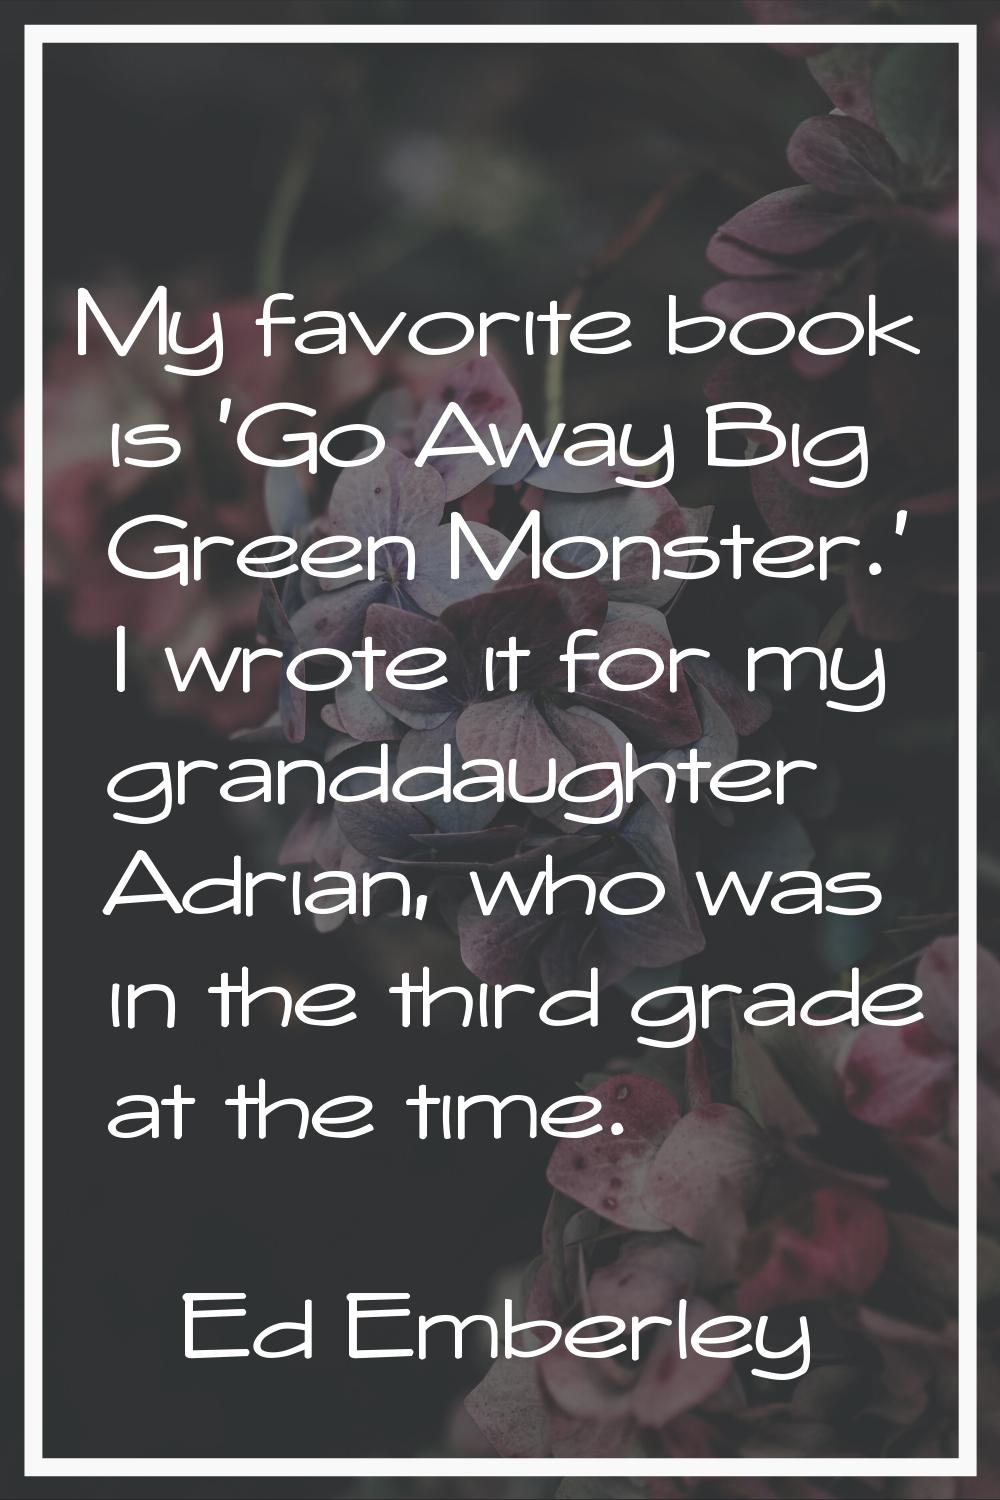 My favorite book is 'Go Away Big Green Monster.' I wrote it for my granddaughter Adrian, who was in